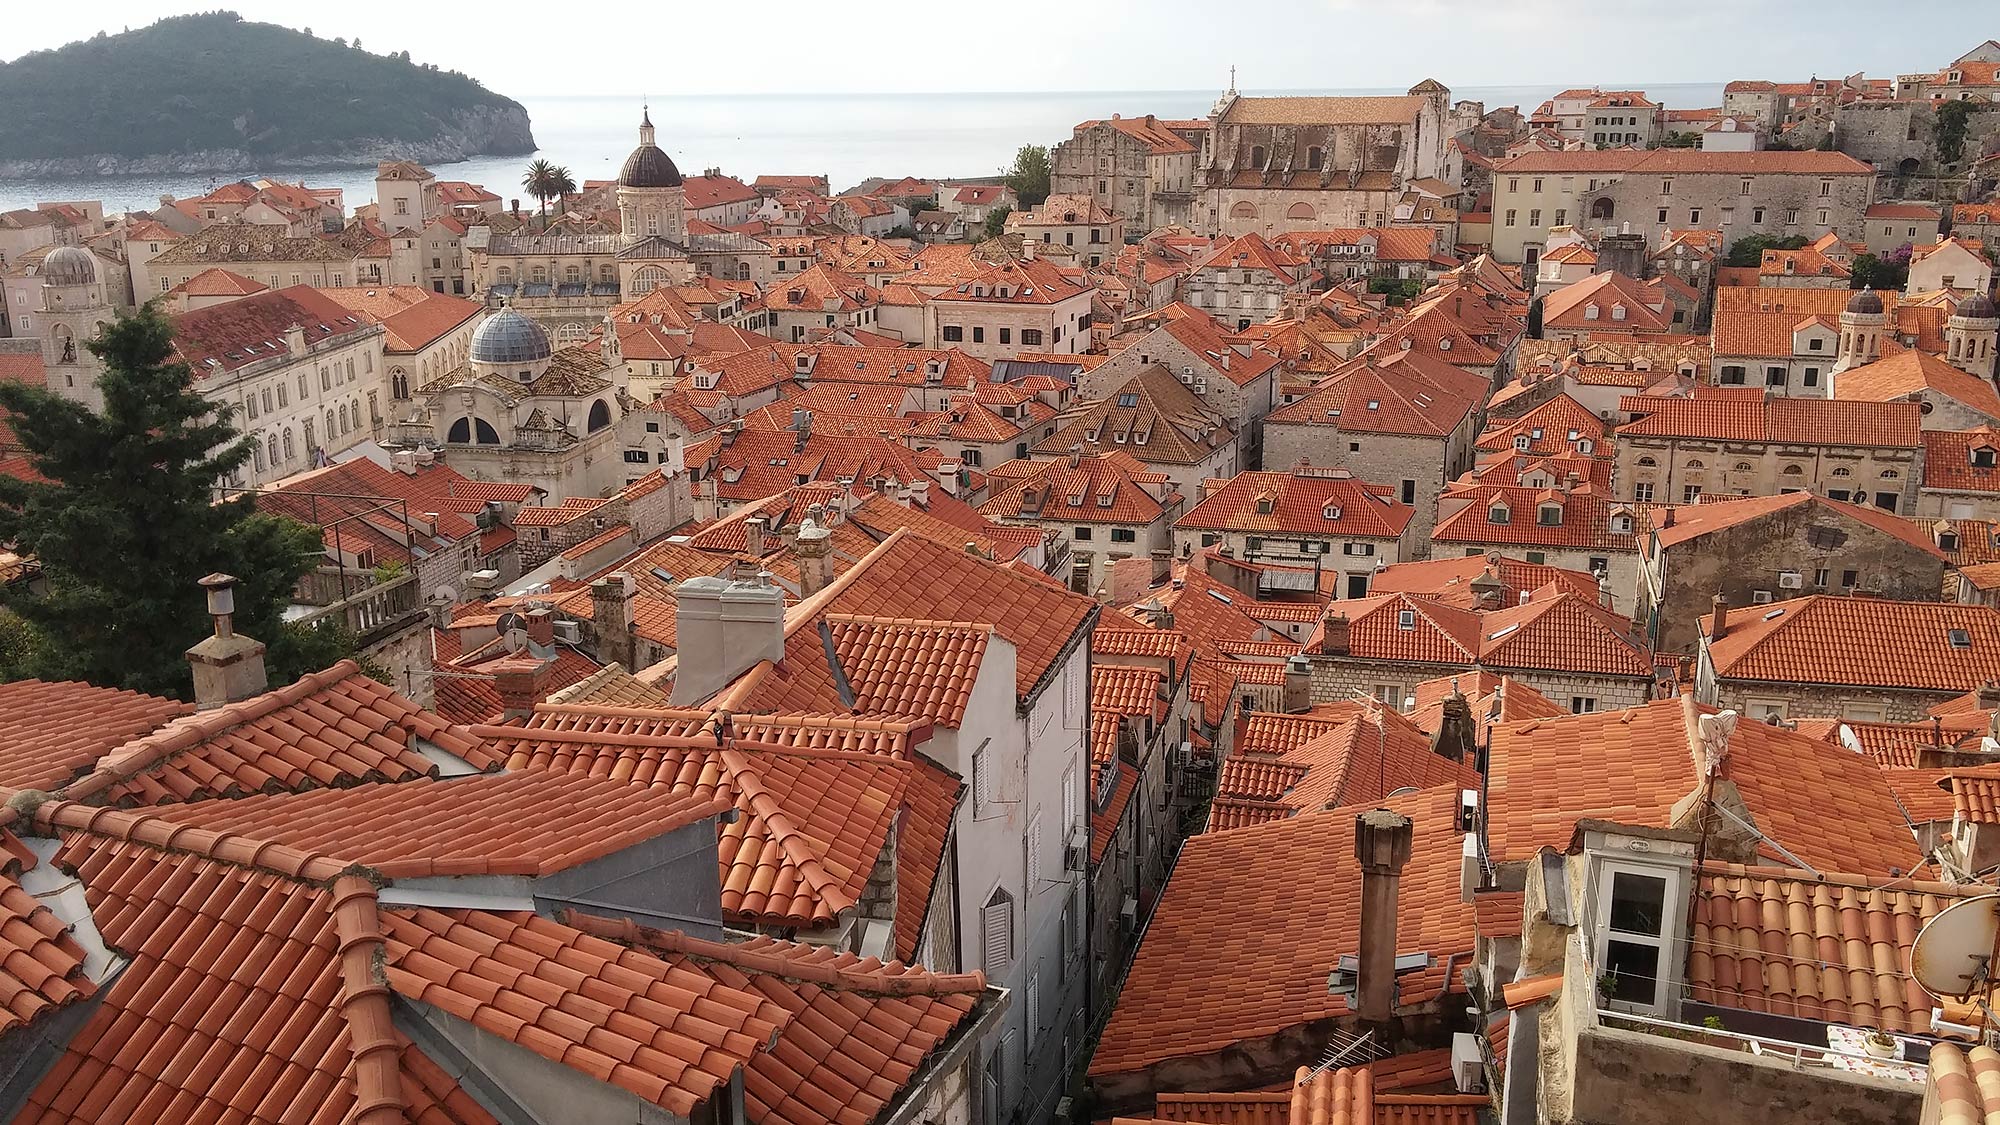 Phone picture of Dubrovnik Rooftops